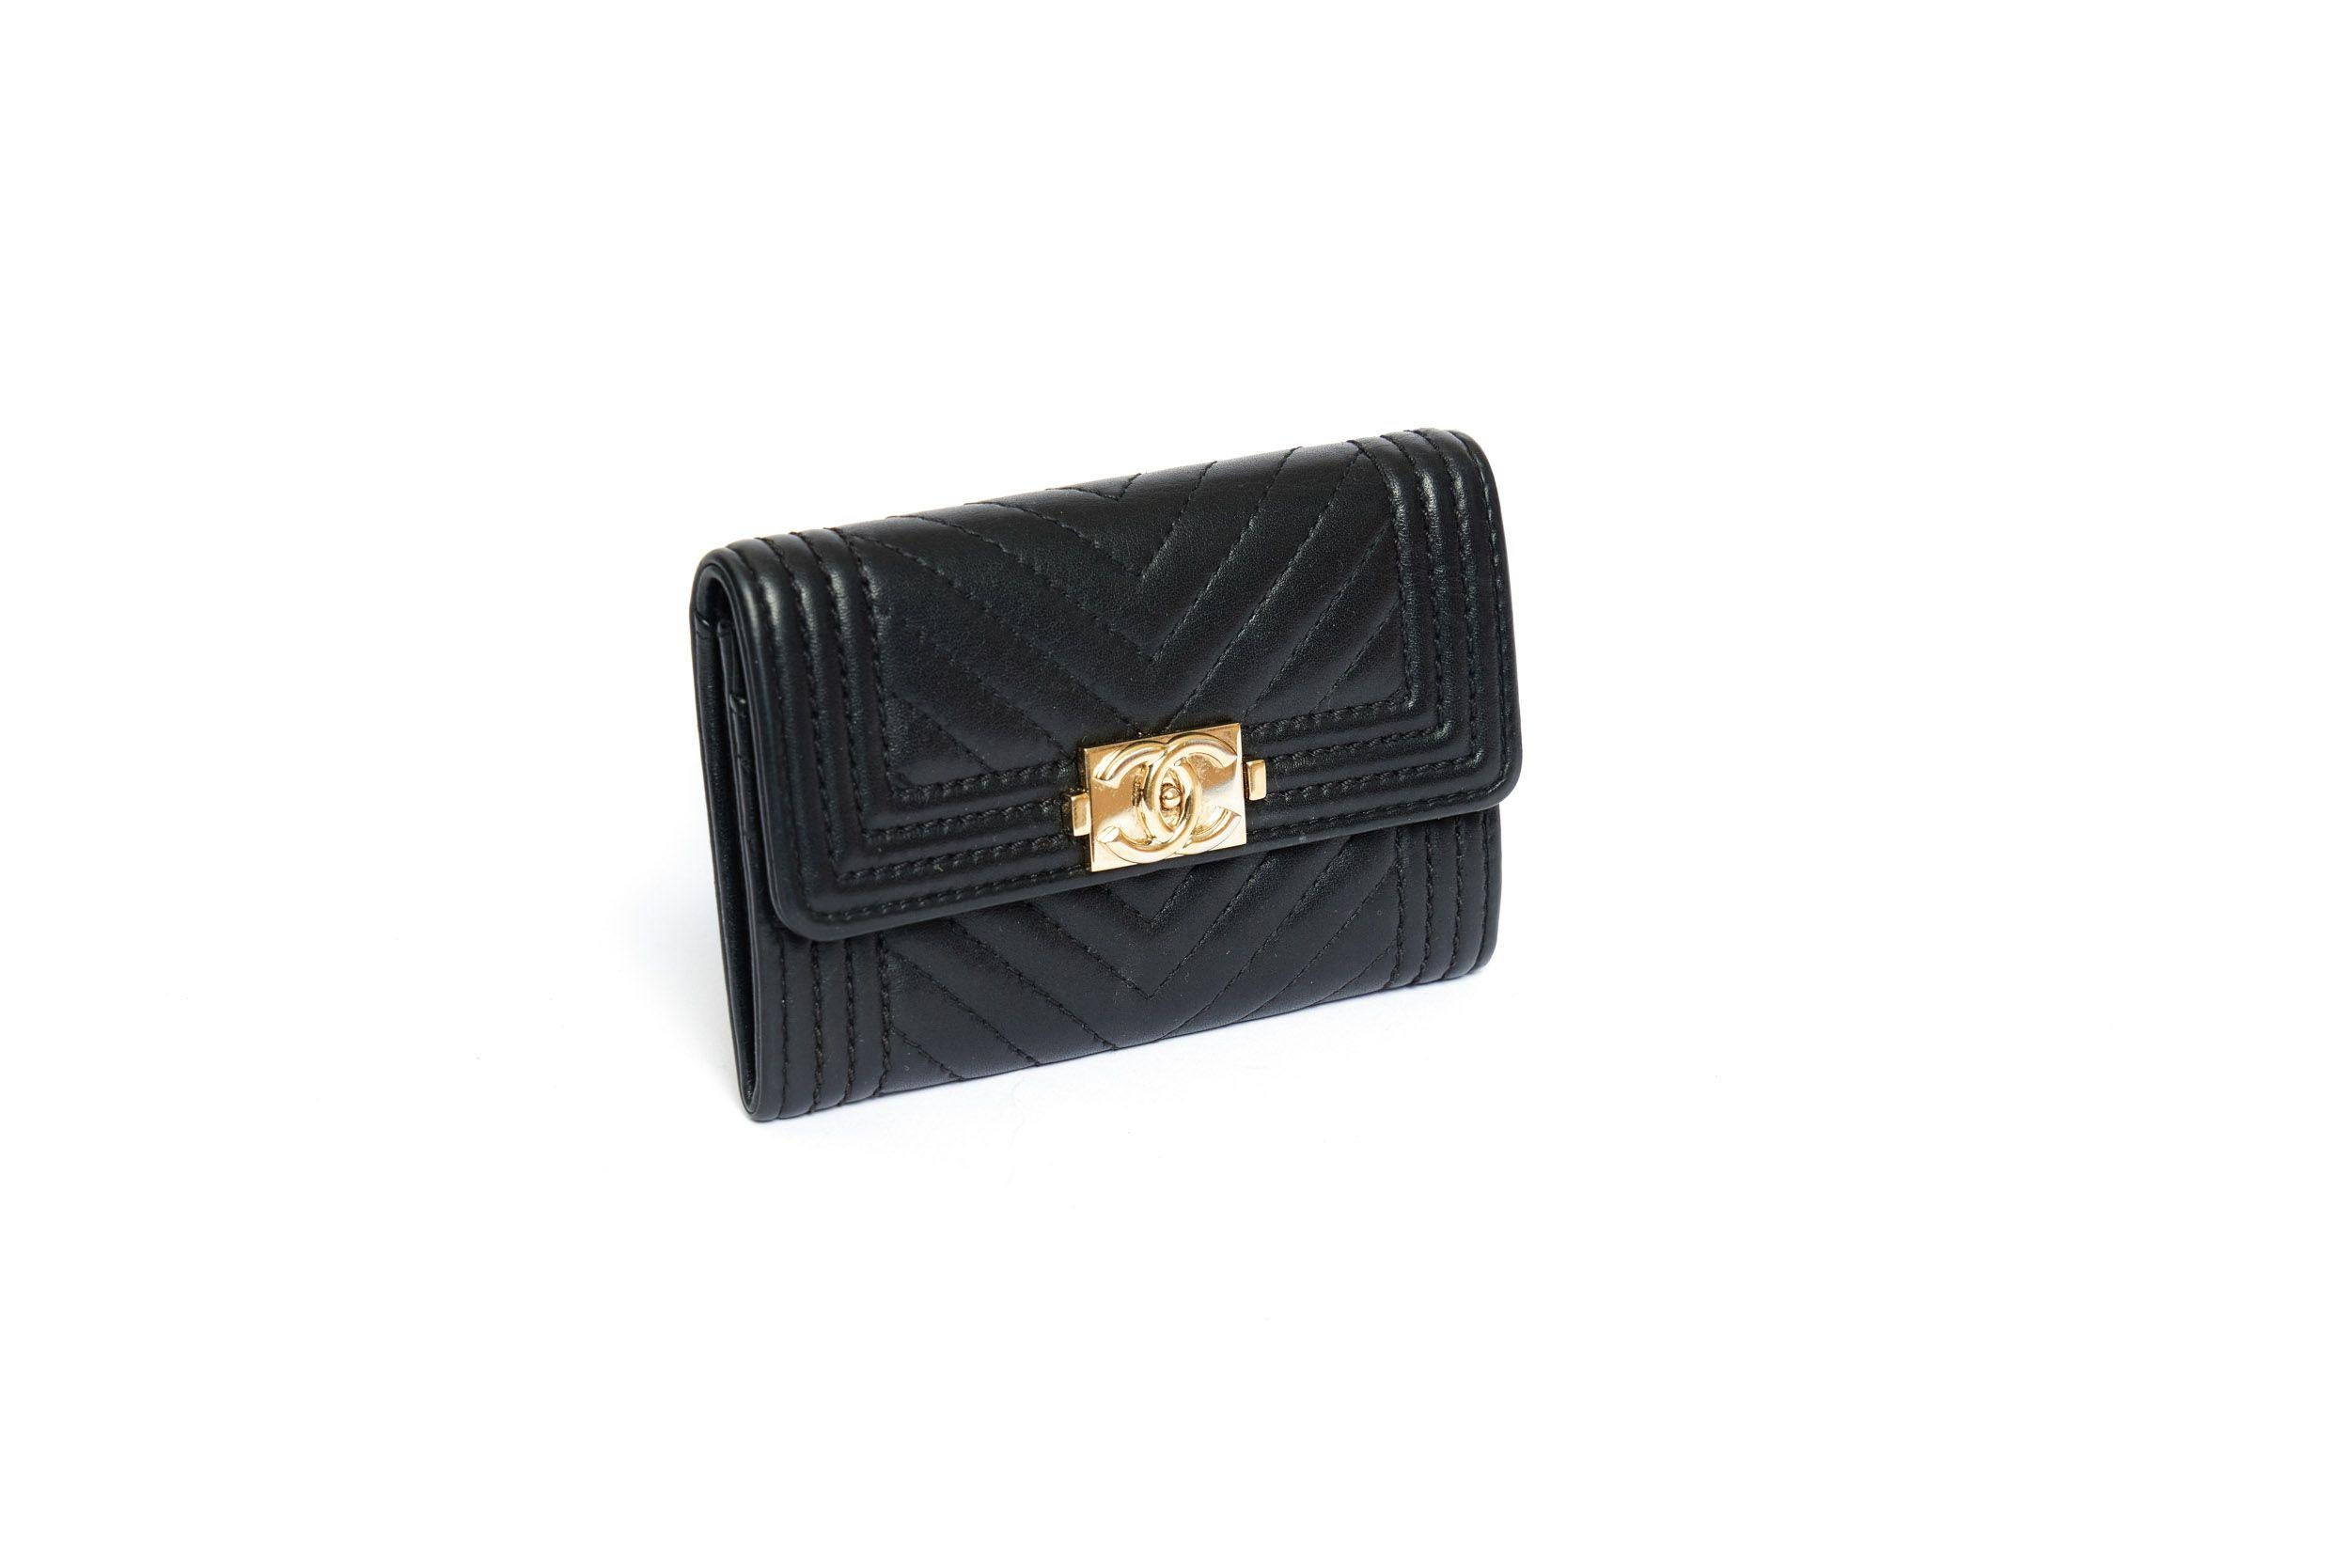 Chanel credit card case in black quilted lambkin leather. It is in beautiful condition and has only small wear marks. The case closes with a snap which has a CC logo. The interior is made of black fabric and has two compartments. The time stamp